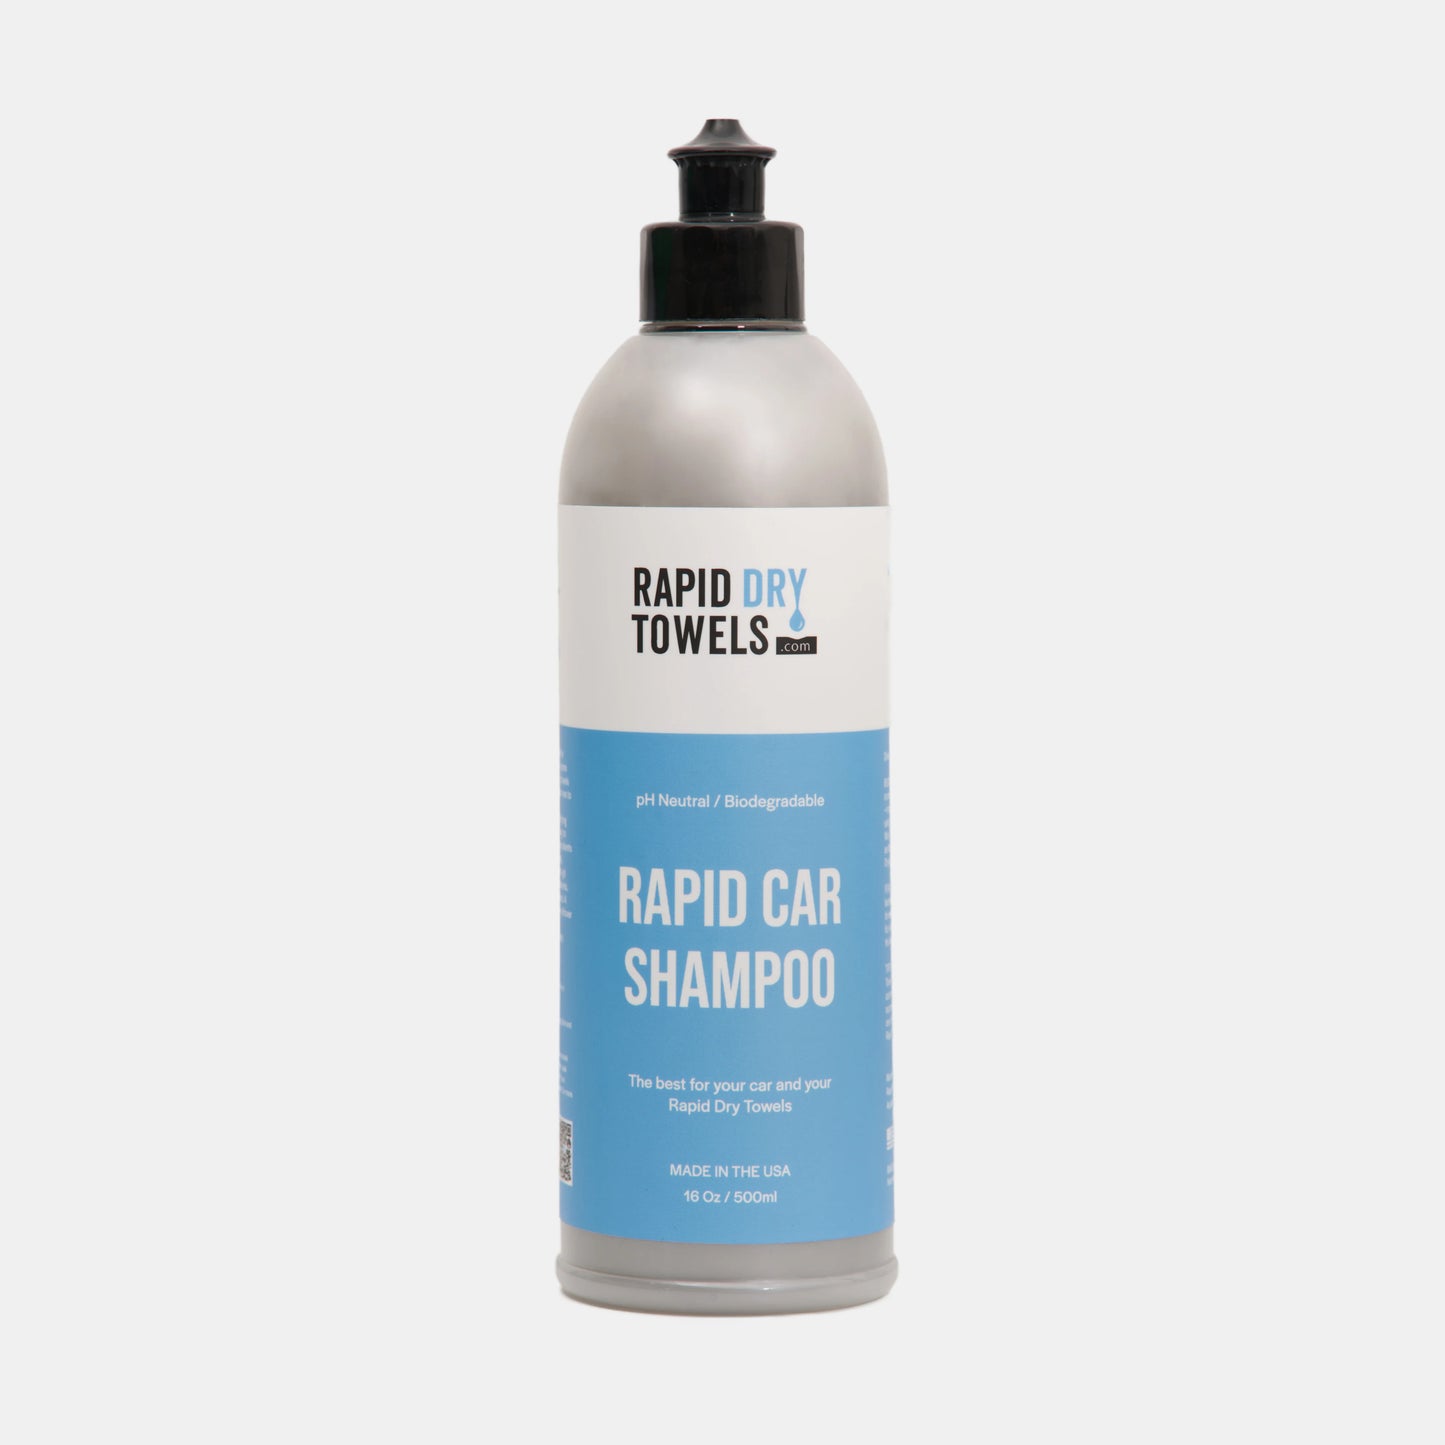 Rapid Dry Towels New! Rapid Car Shampoo - 16oz/500ml - Sierra Madre Collection